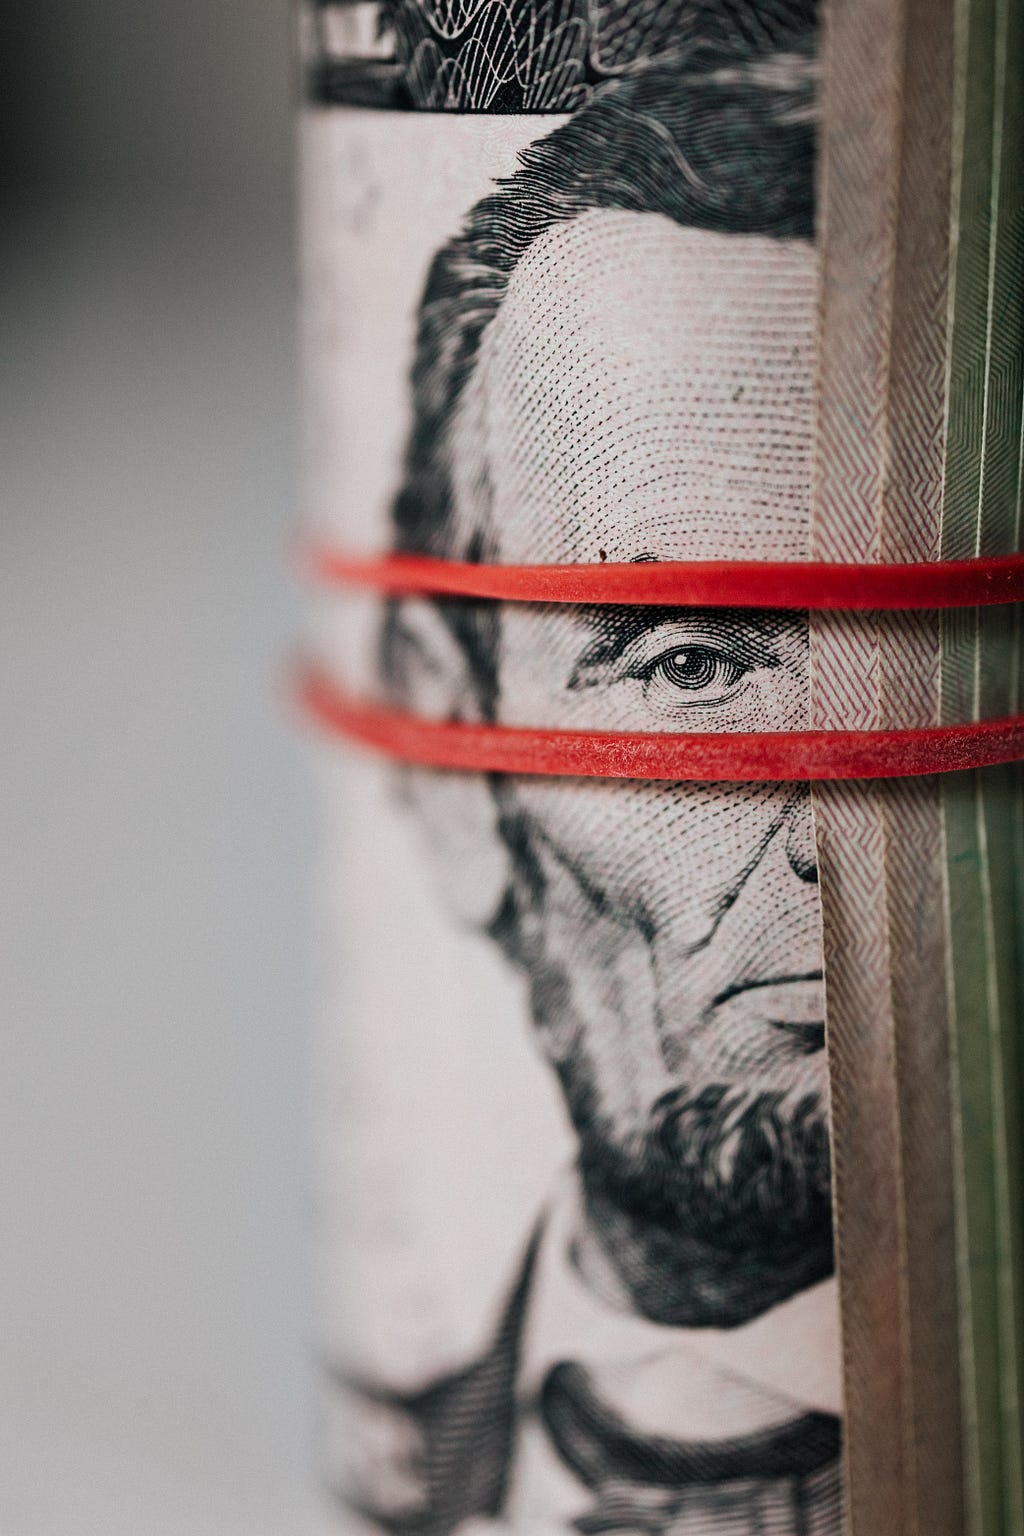 Dollar bills with Abraham Lincoln’s face in focus